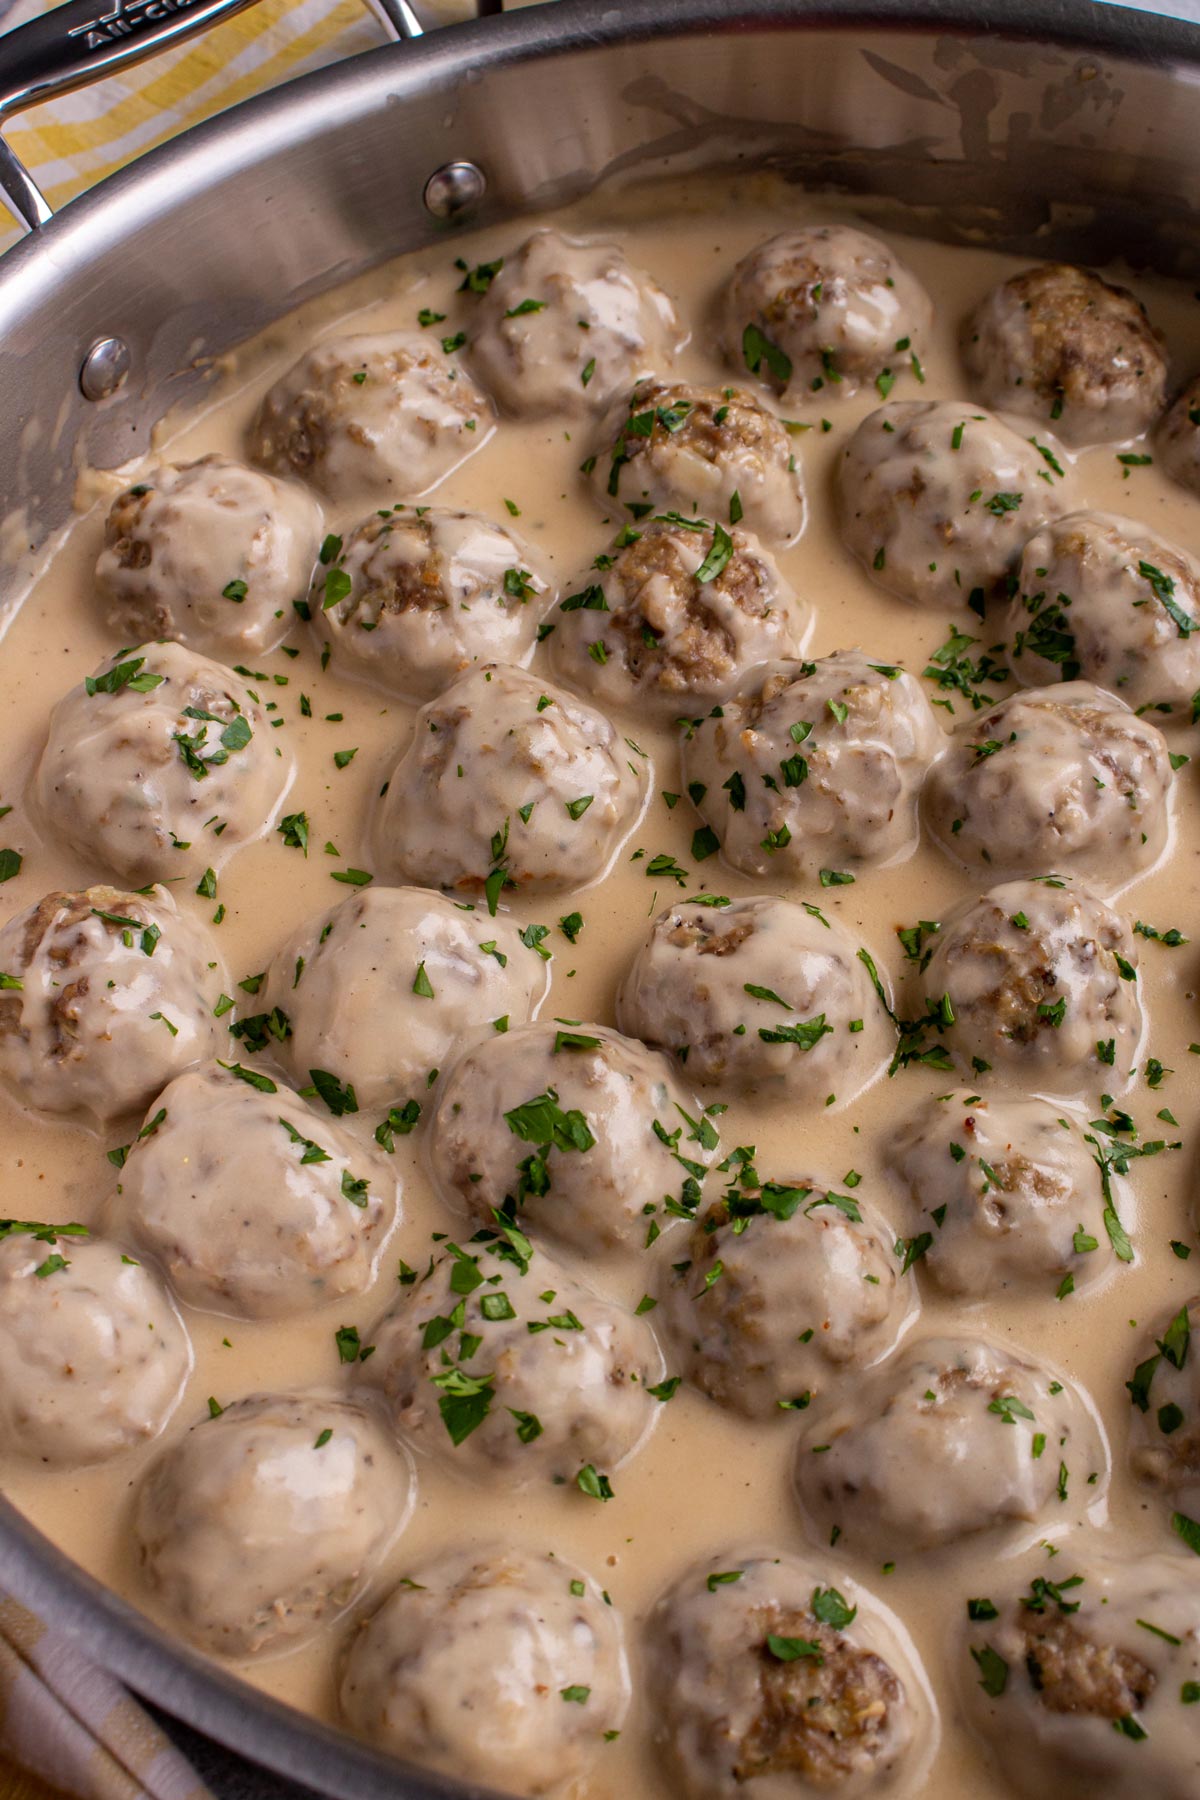 Swedish meatballs with creamy gravy and topped with chopped parsley in a wide metal skillet.